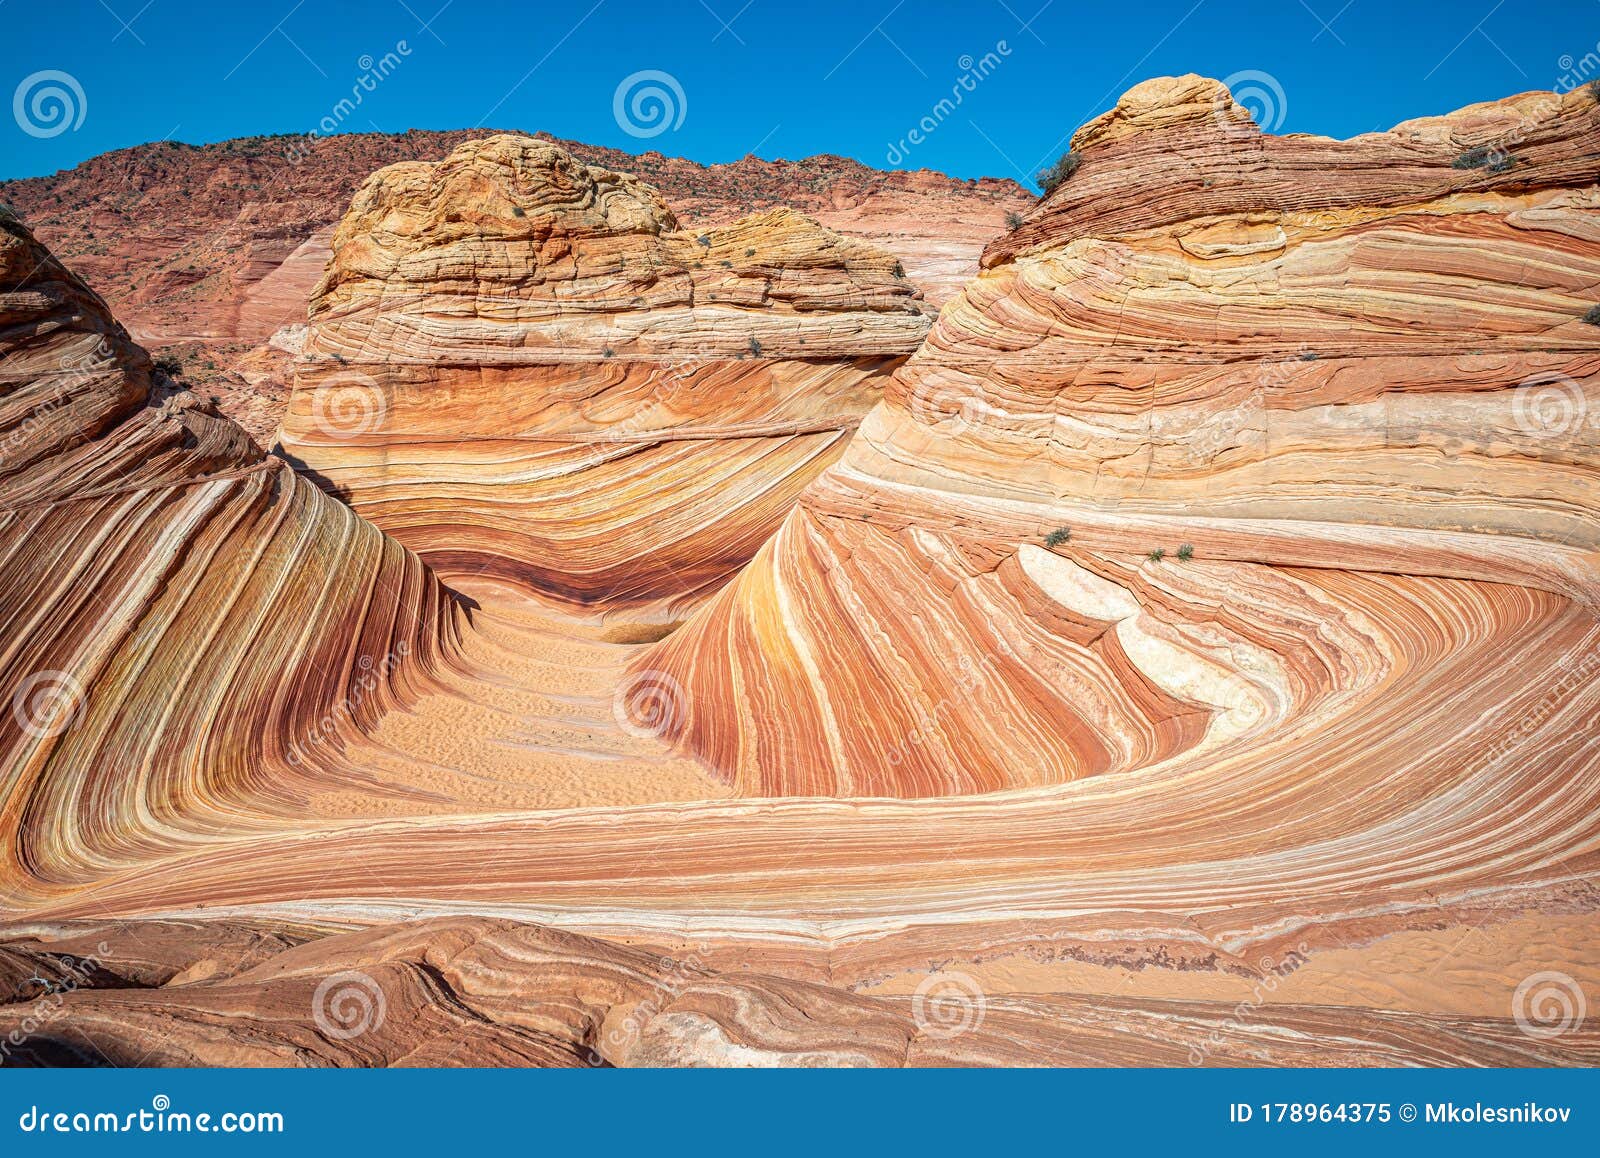 arizona wave - famous geology rock formation in pariah canyon, usa